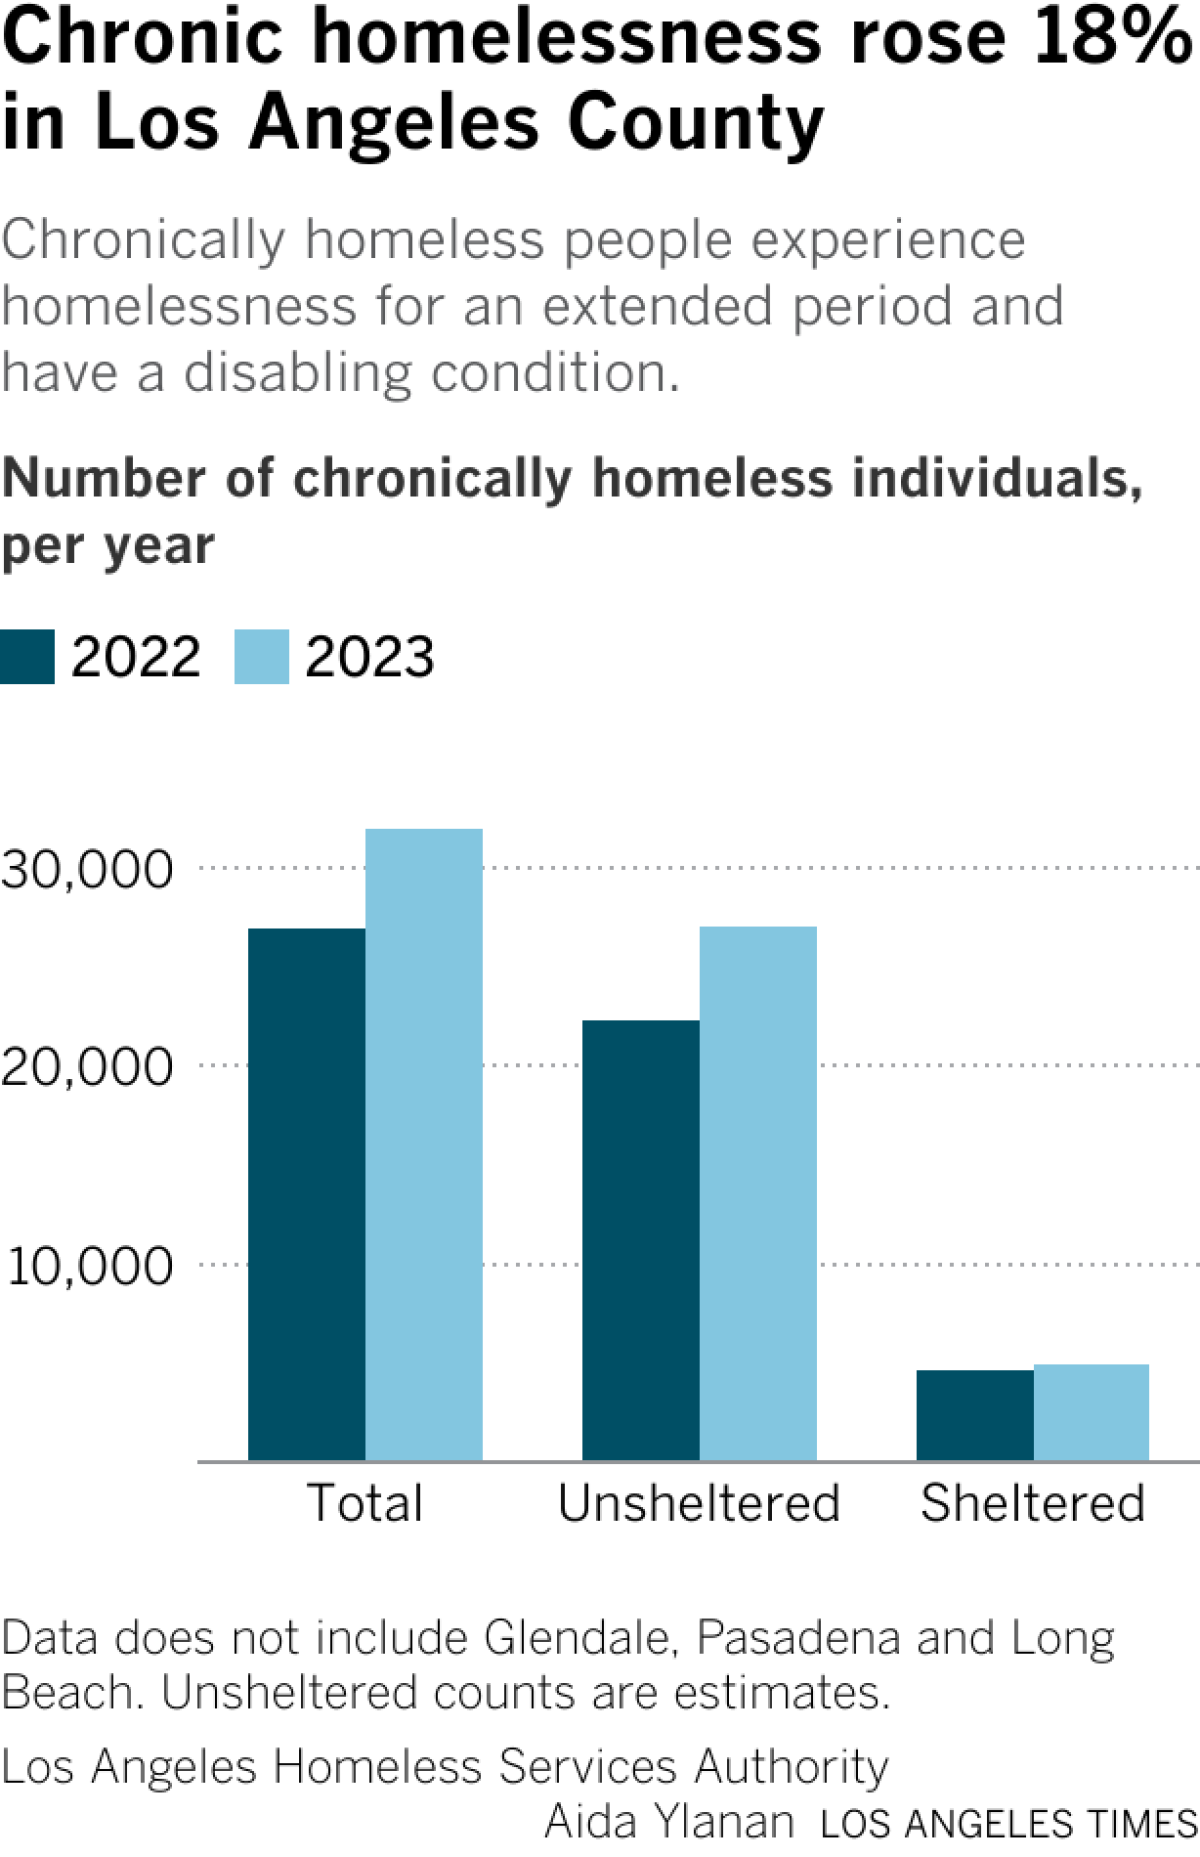 Chronically homeless people experience homelessness for an extended period and have a disabling condition.